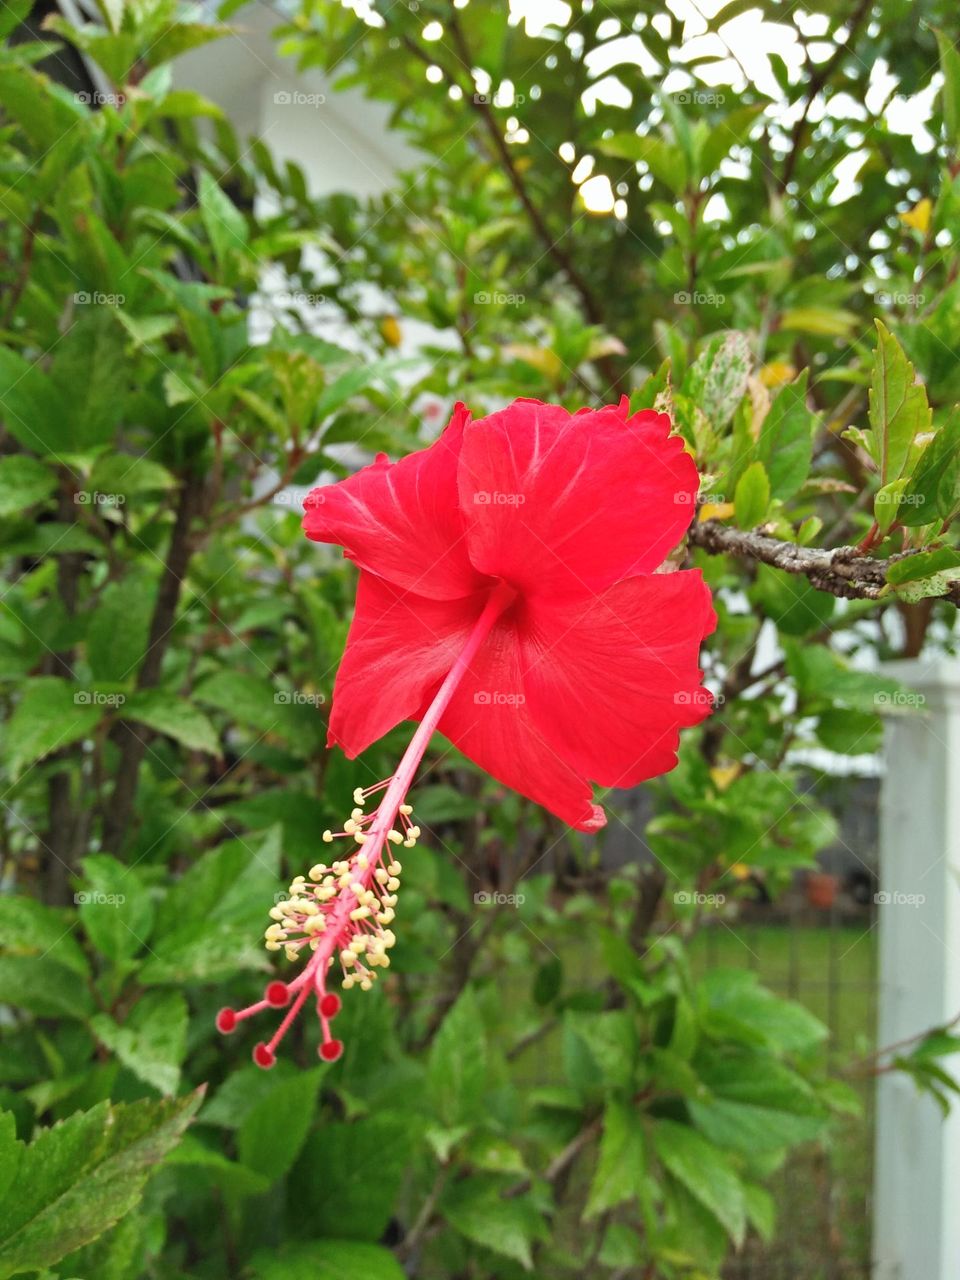 flower in red